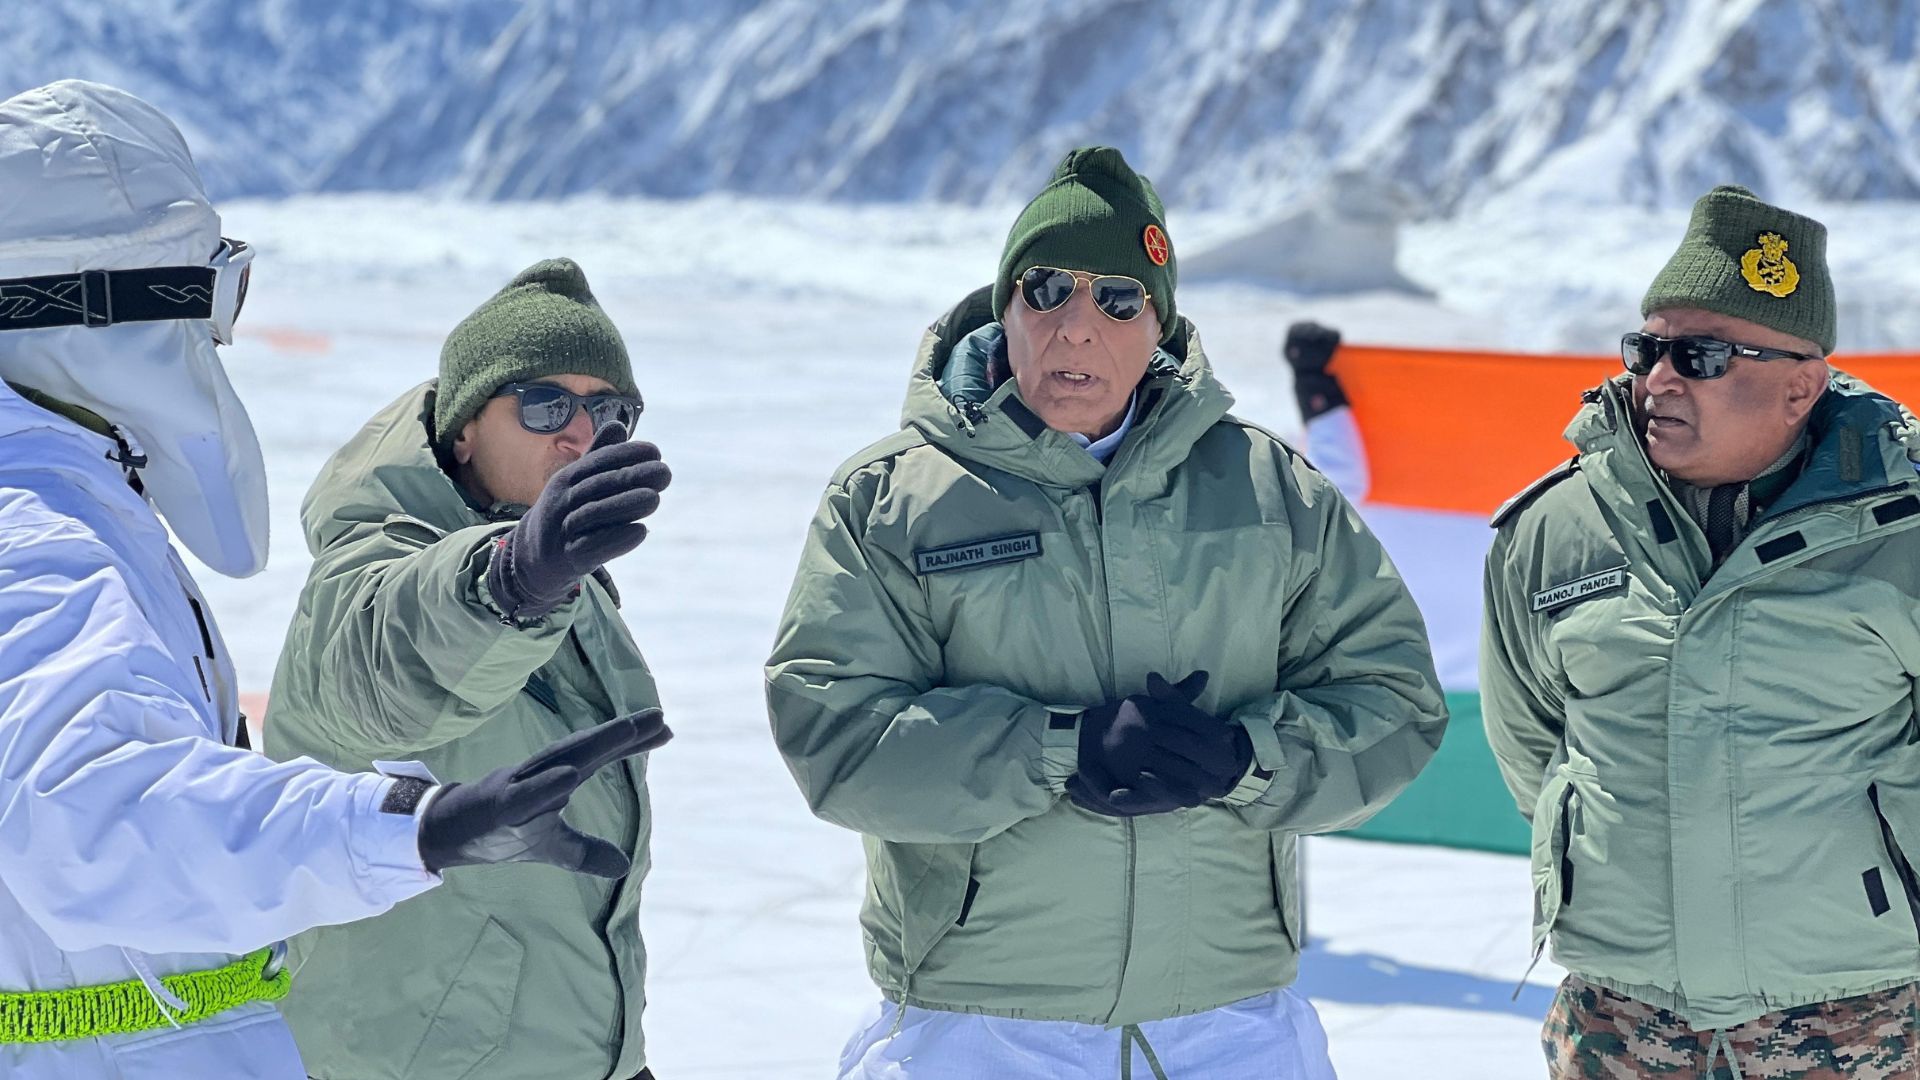 ‘Siachen is India’s capital of valour and bravery’ says Rajnath Singh while interacting with Armed Forces